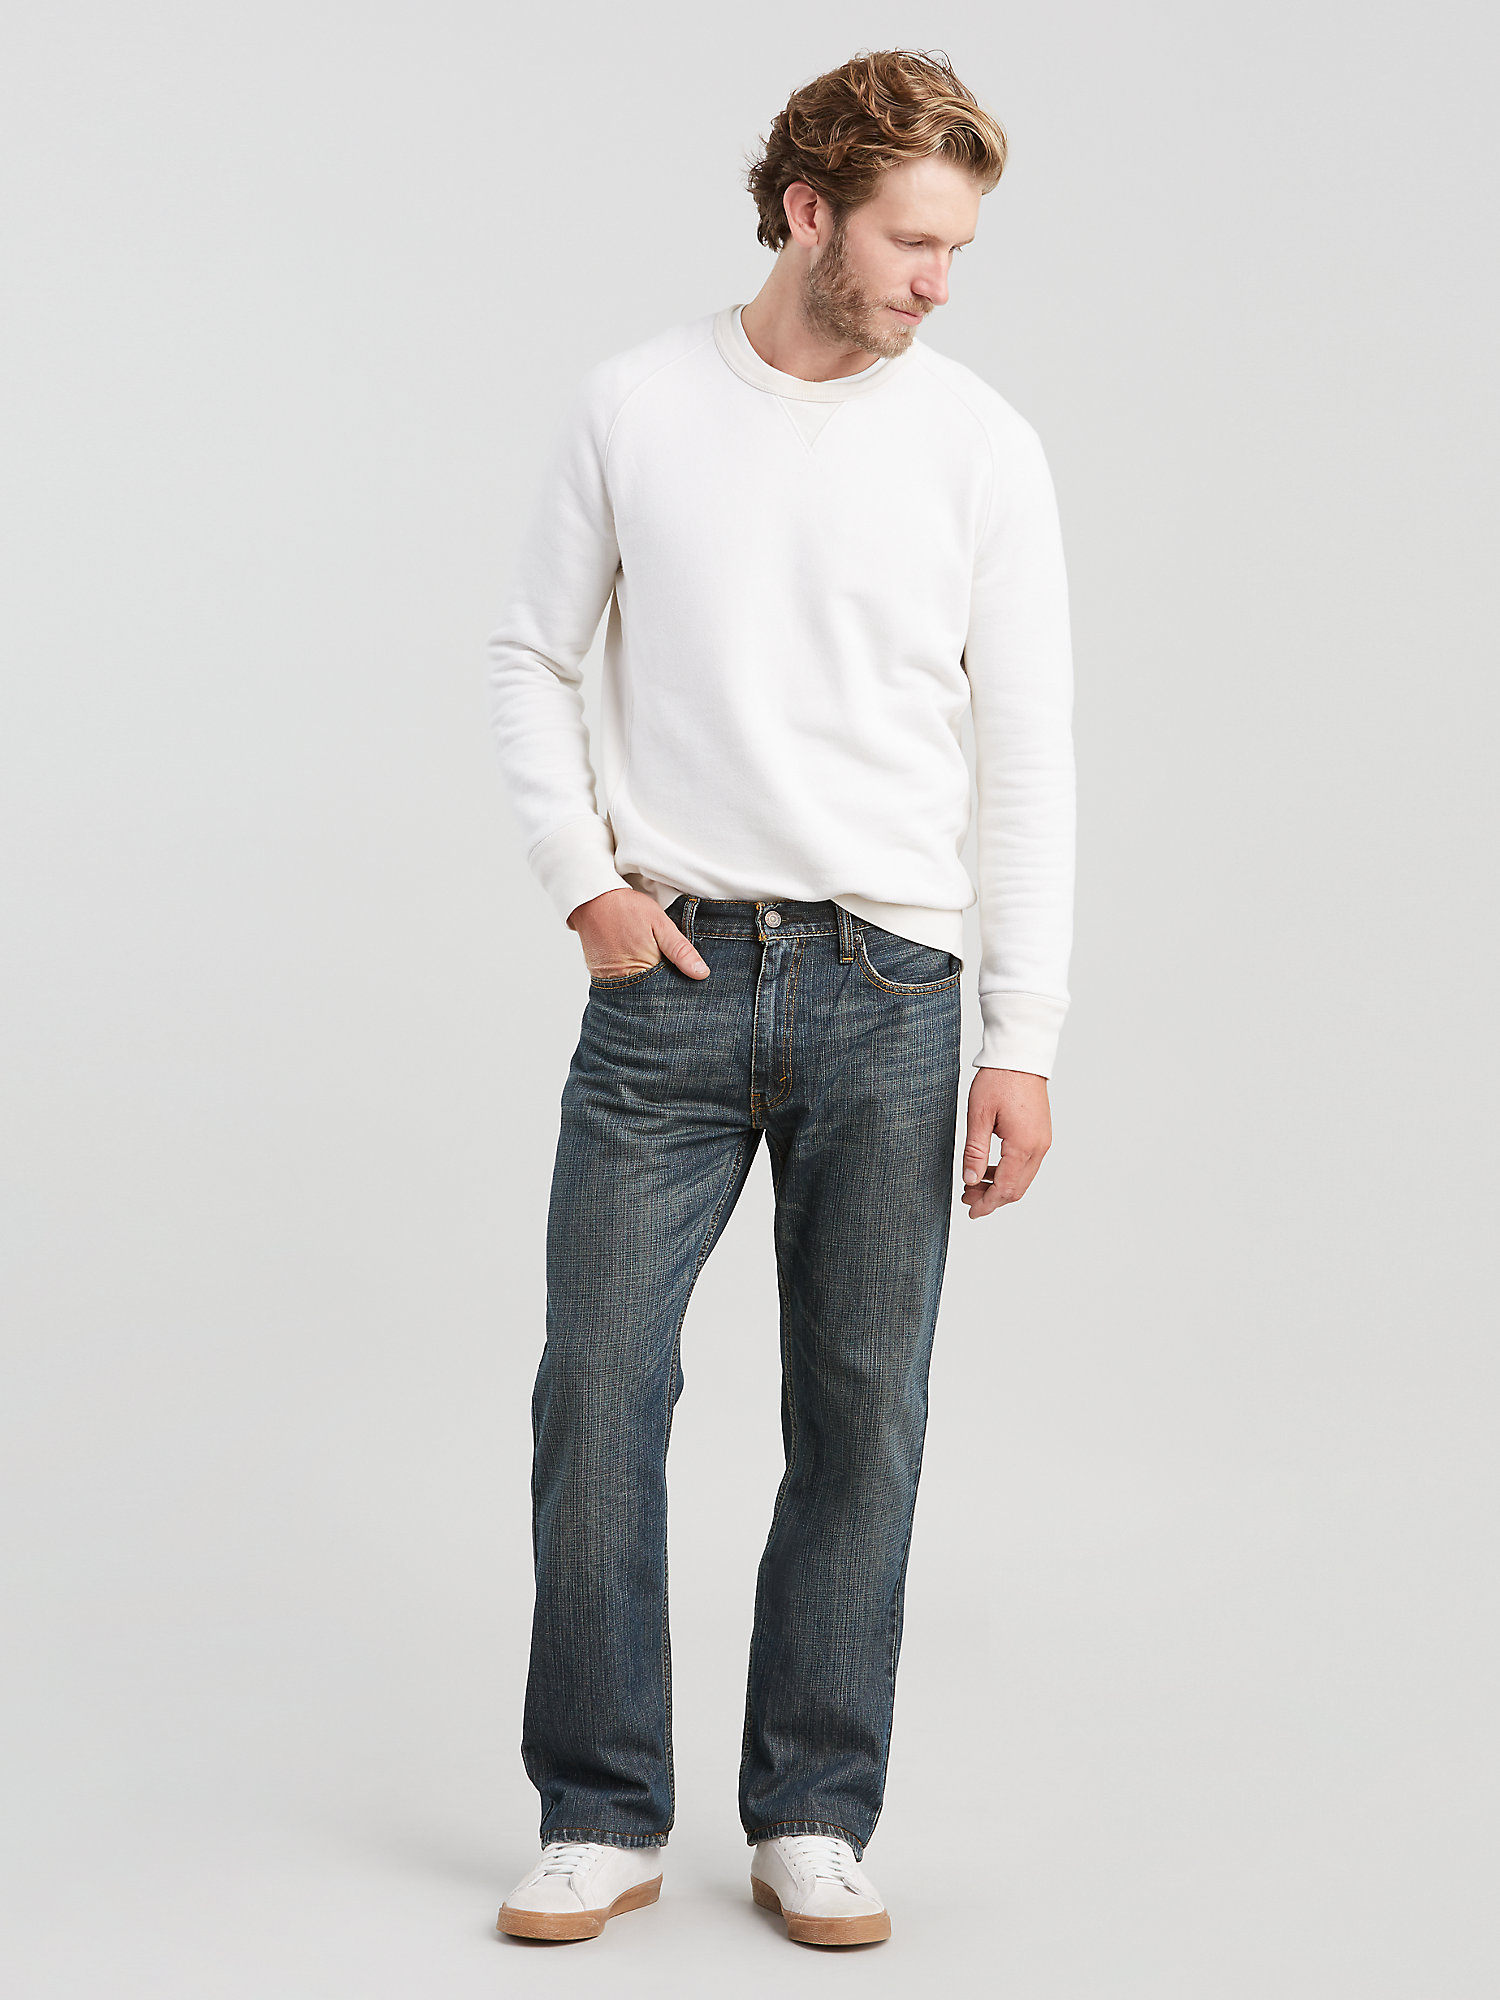 Levi's Men's Big & Tall 559 Relaxed Straight Jeans - image 4 of 6